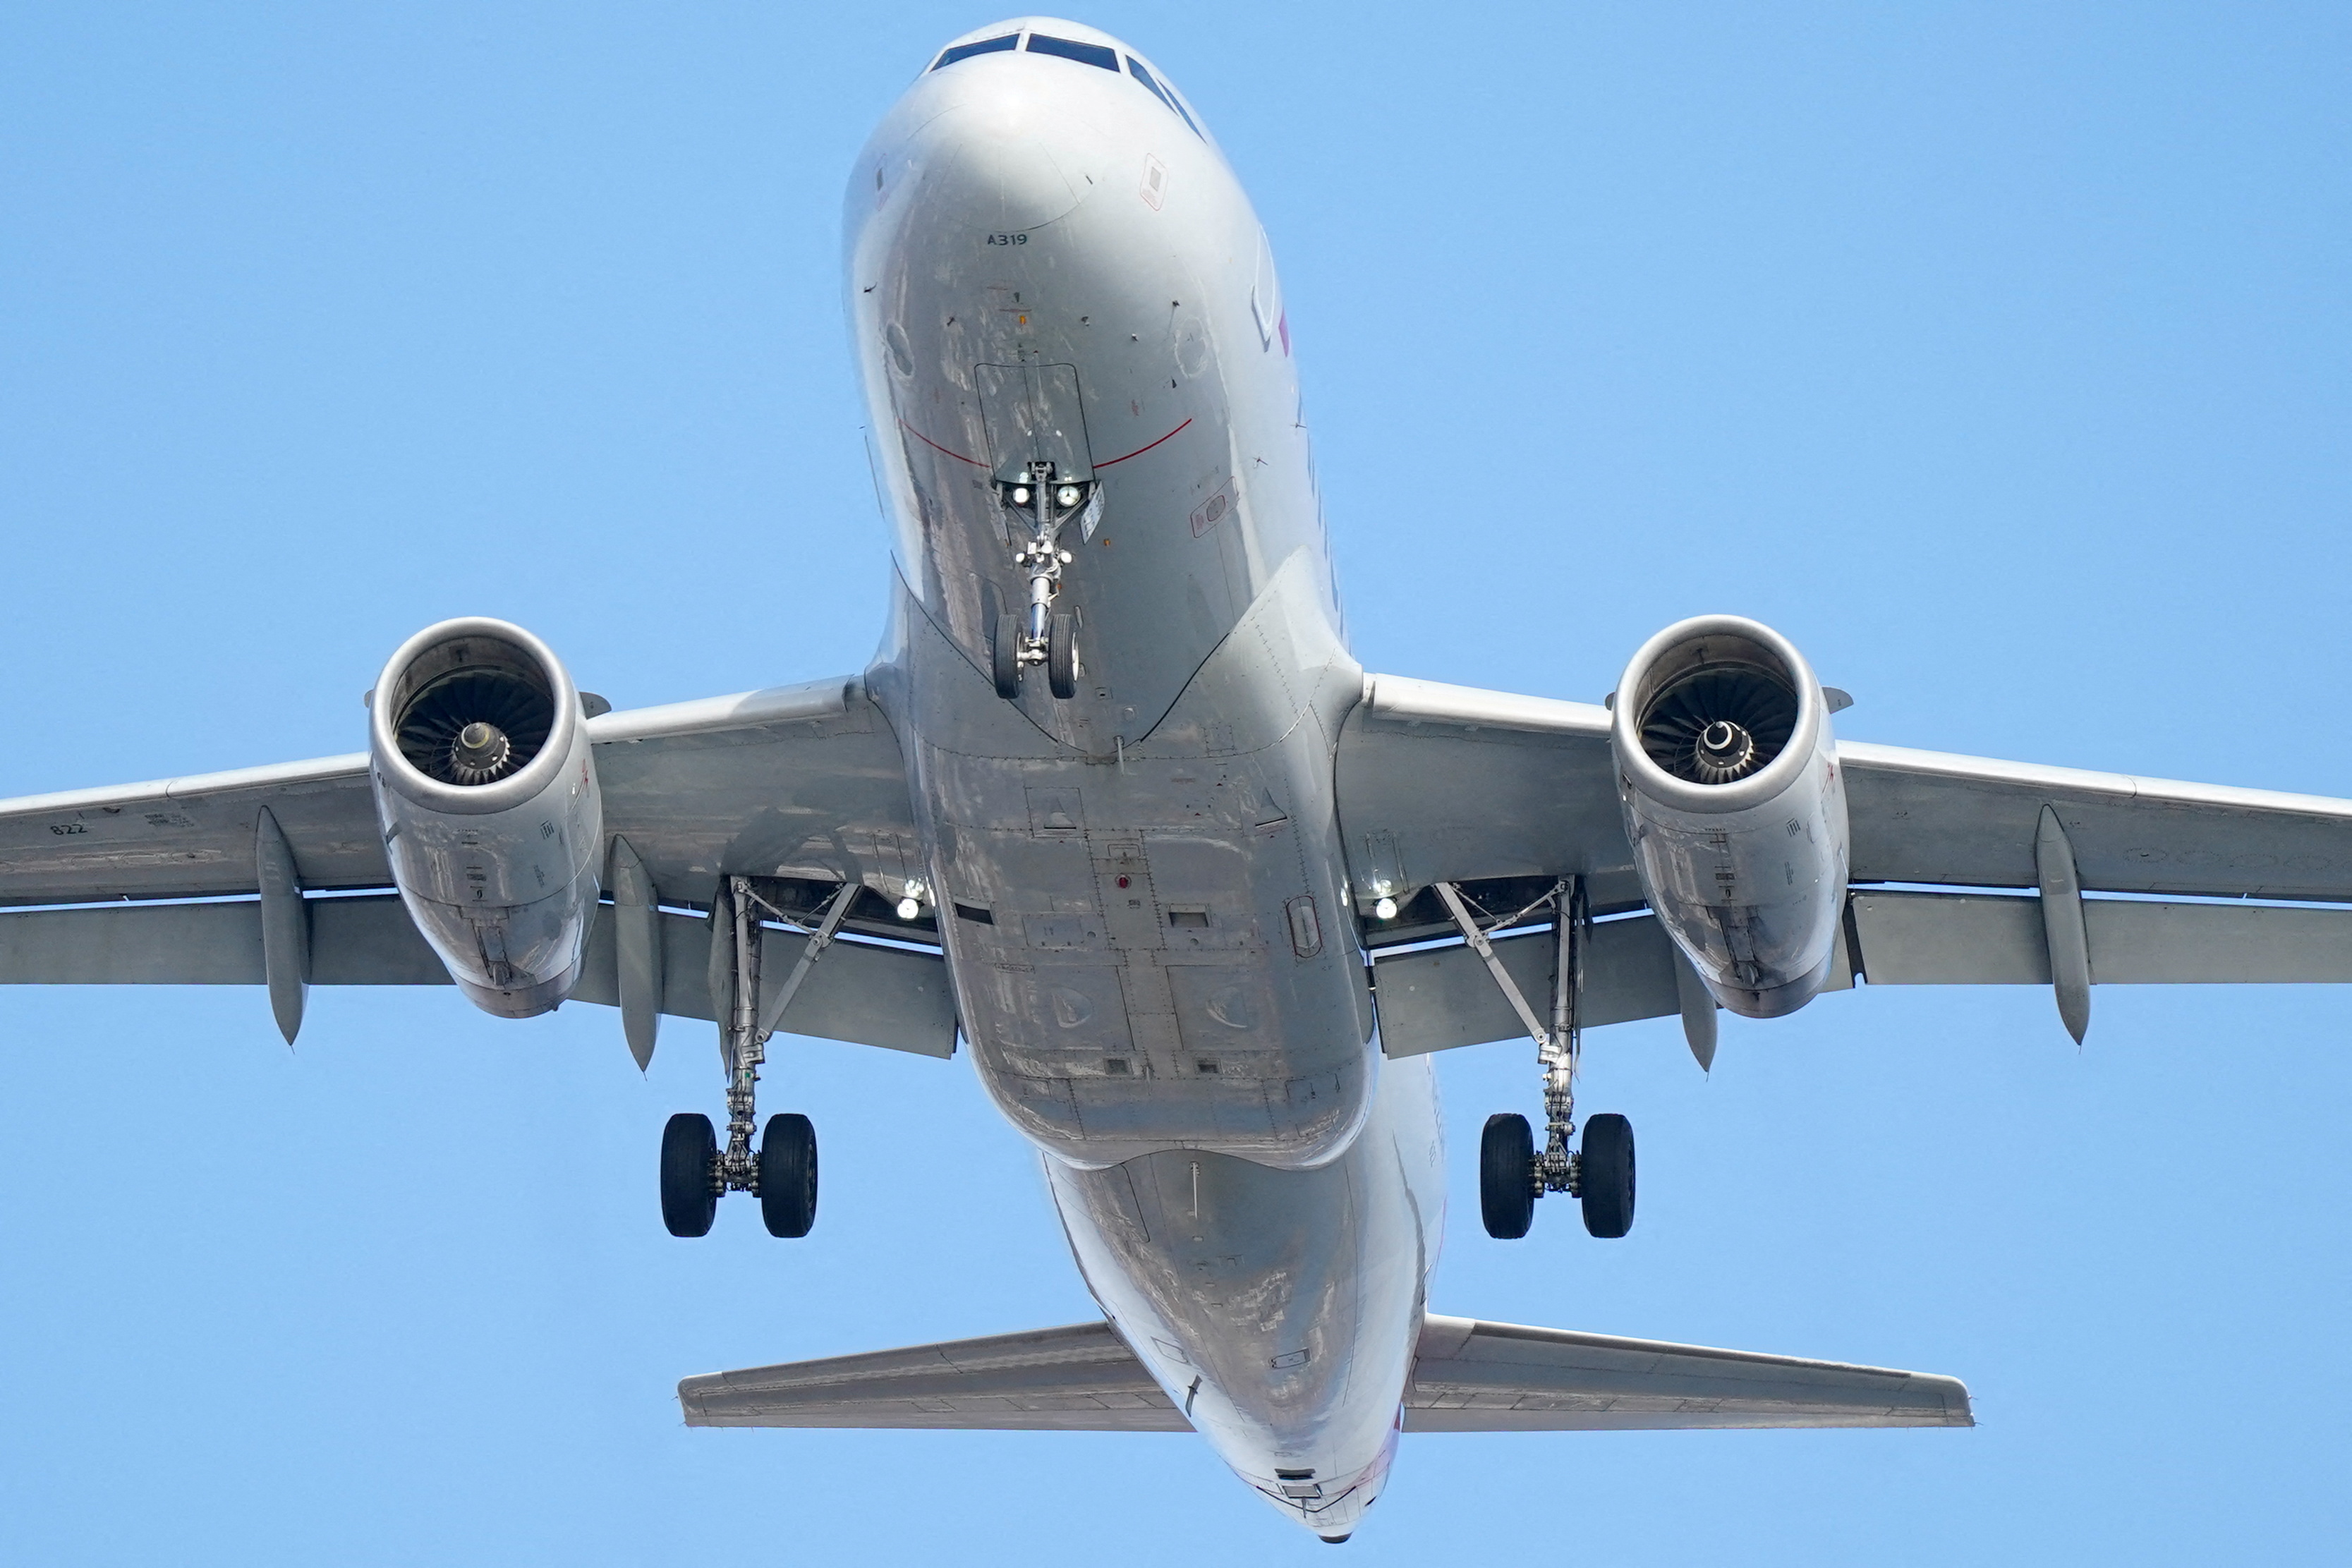 5G technology may conflict with commercial aviation